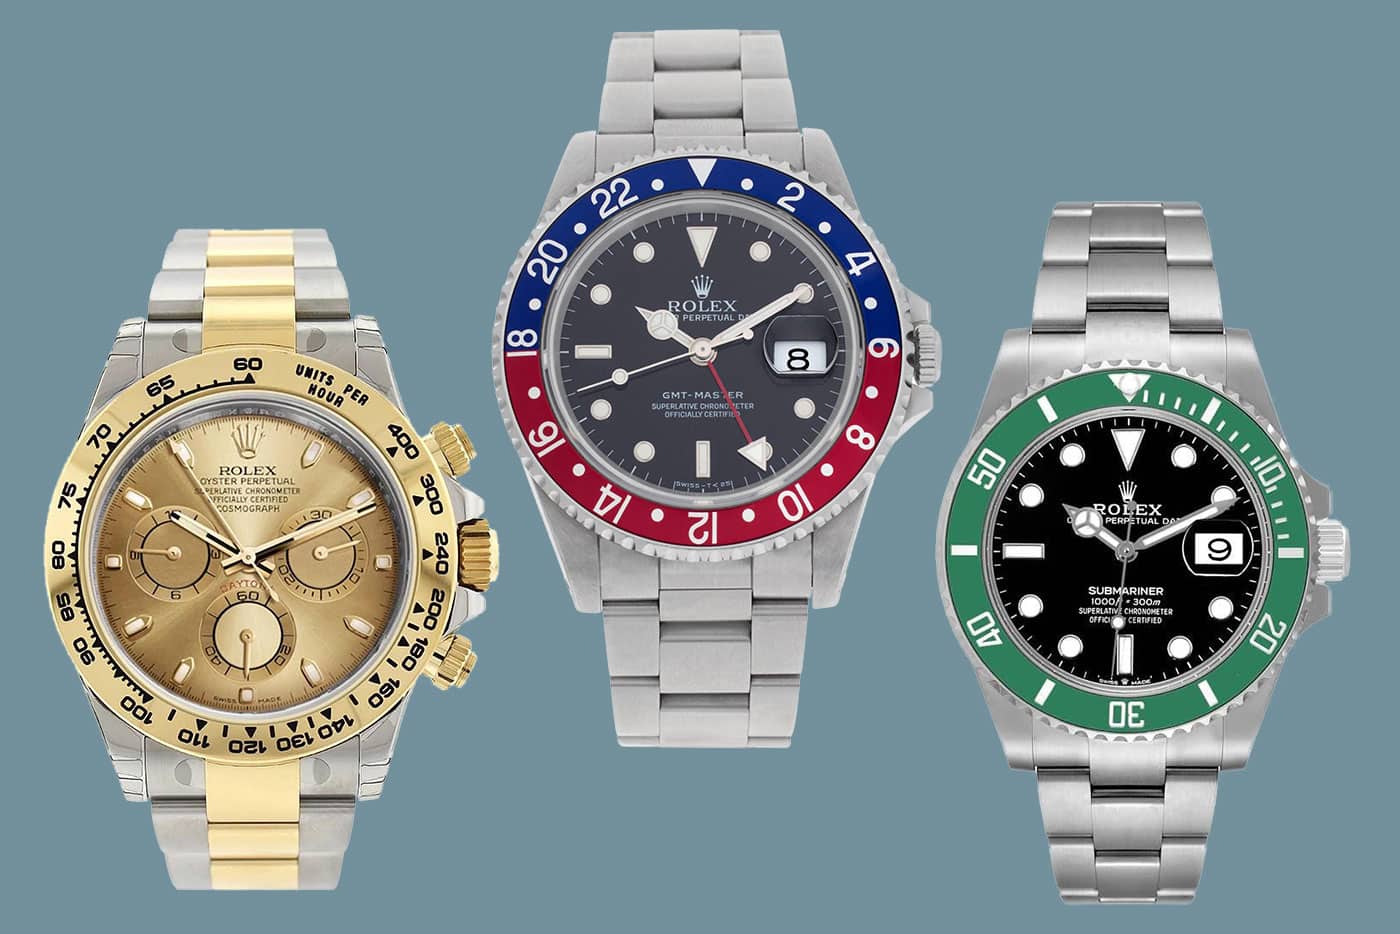 featured image for post: Rolex Buying Guide: Everything You Need to Know about Choosing the Right Watch